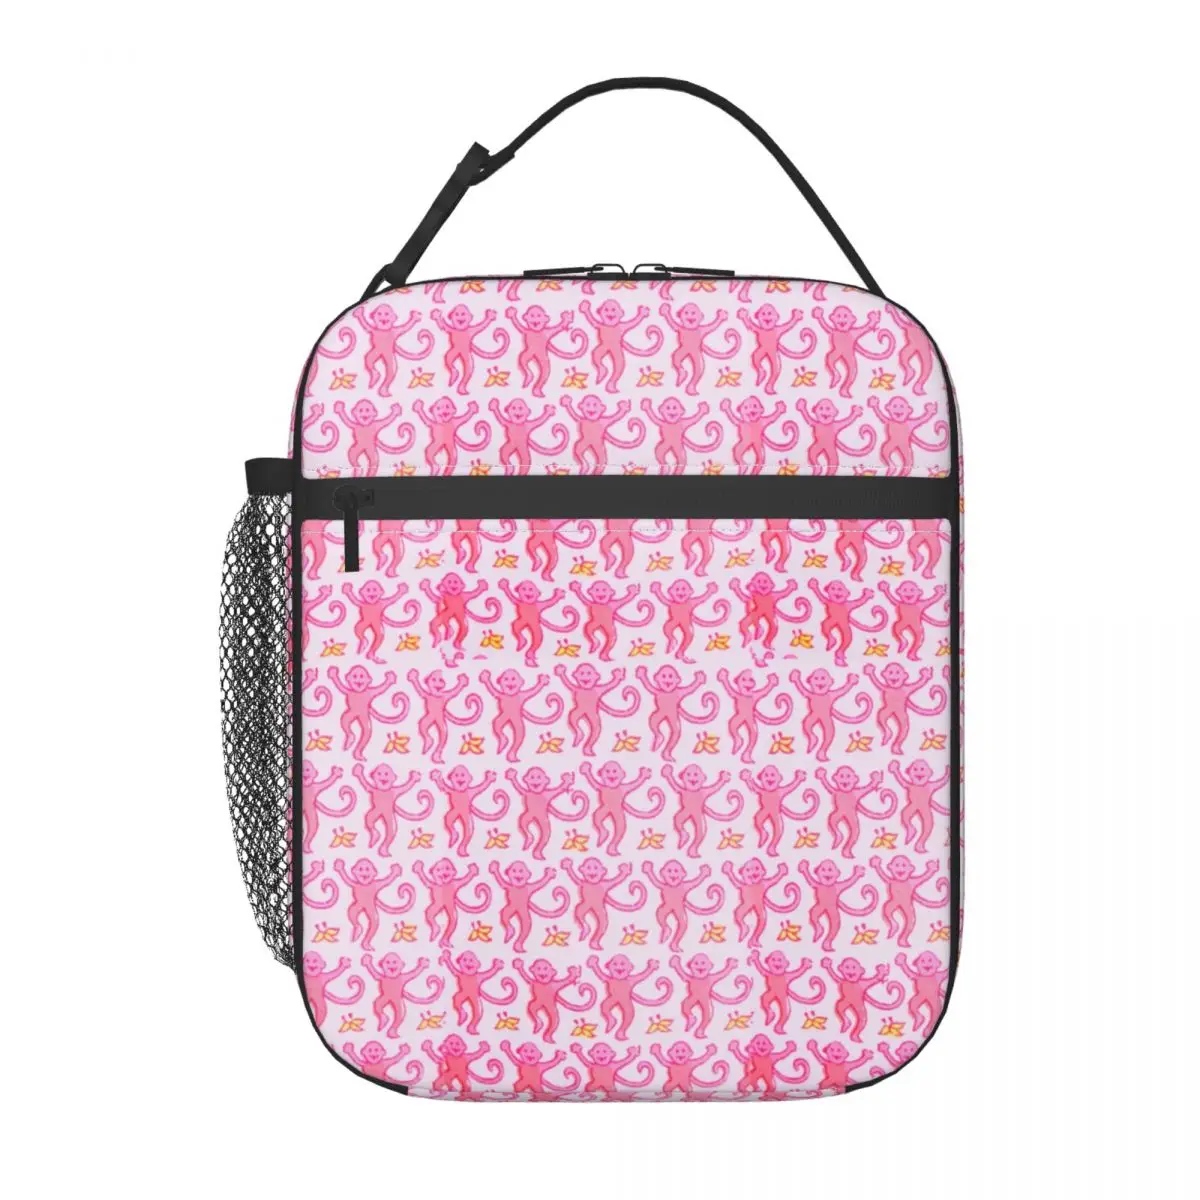 

Preppy Roller Monkeys Rabbit Insulated Lunch Bag for Women Leakproof Anime Pink Cooler Thermal Lunch Tote Office Work School